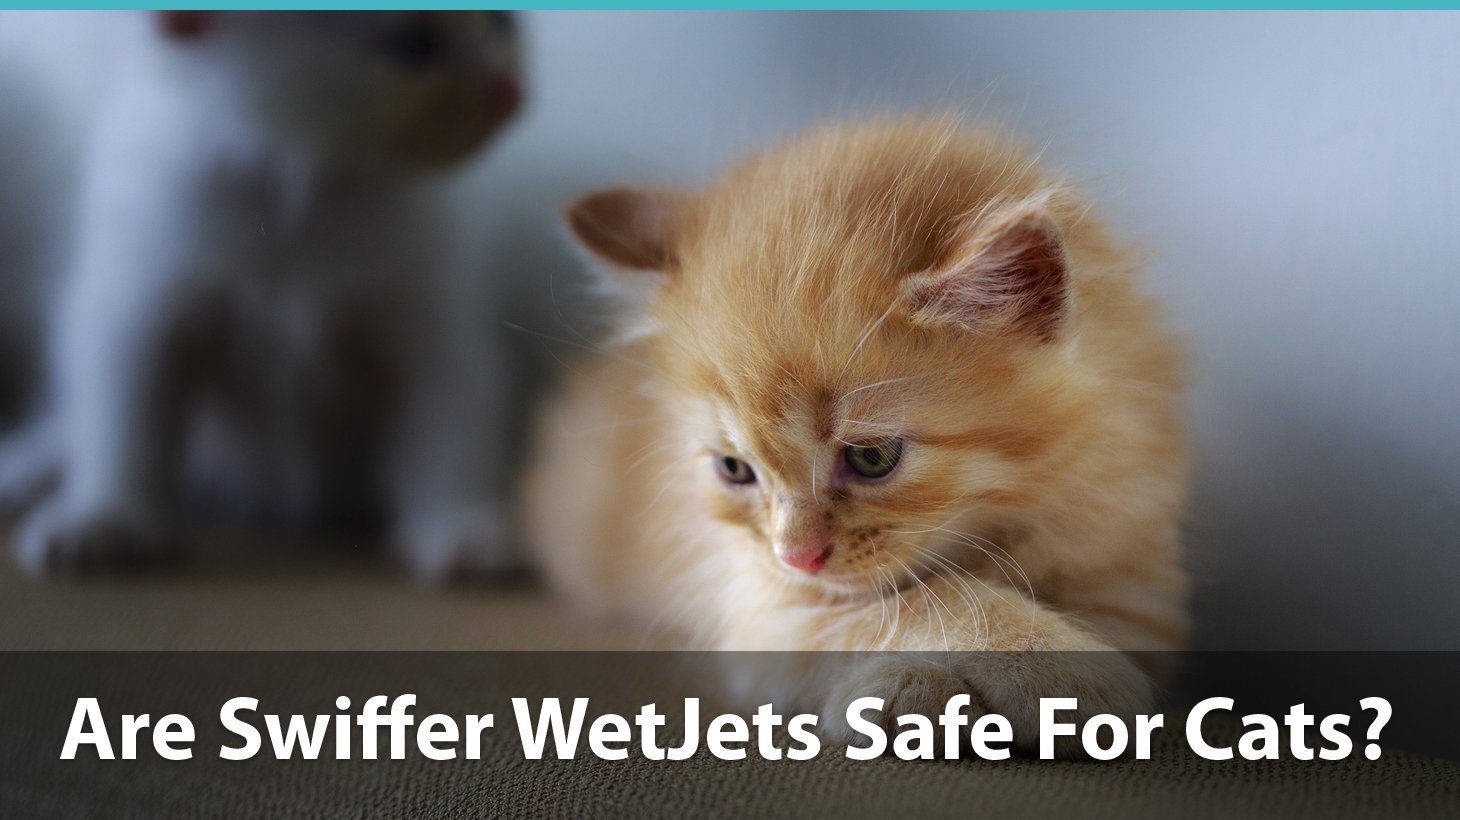 Are Swiffer WetJets Safe Or Are They Toxic And Bad For Cats?